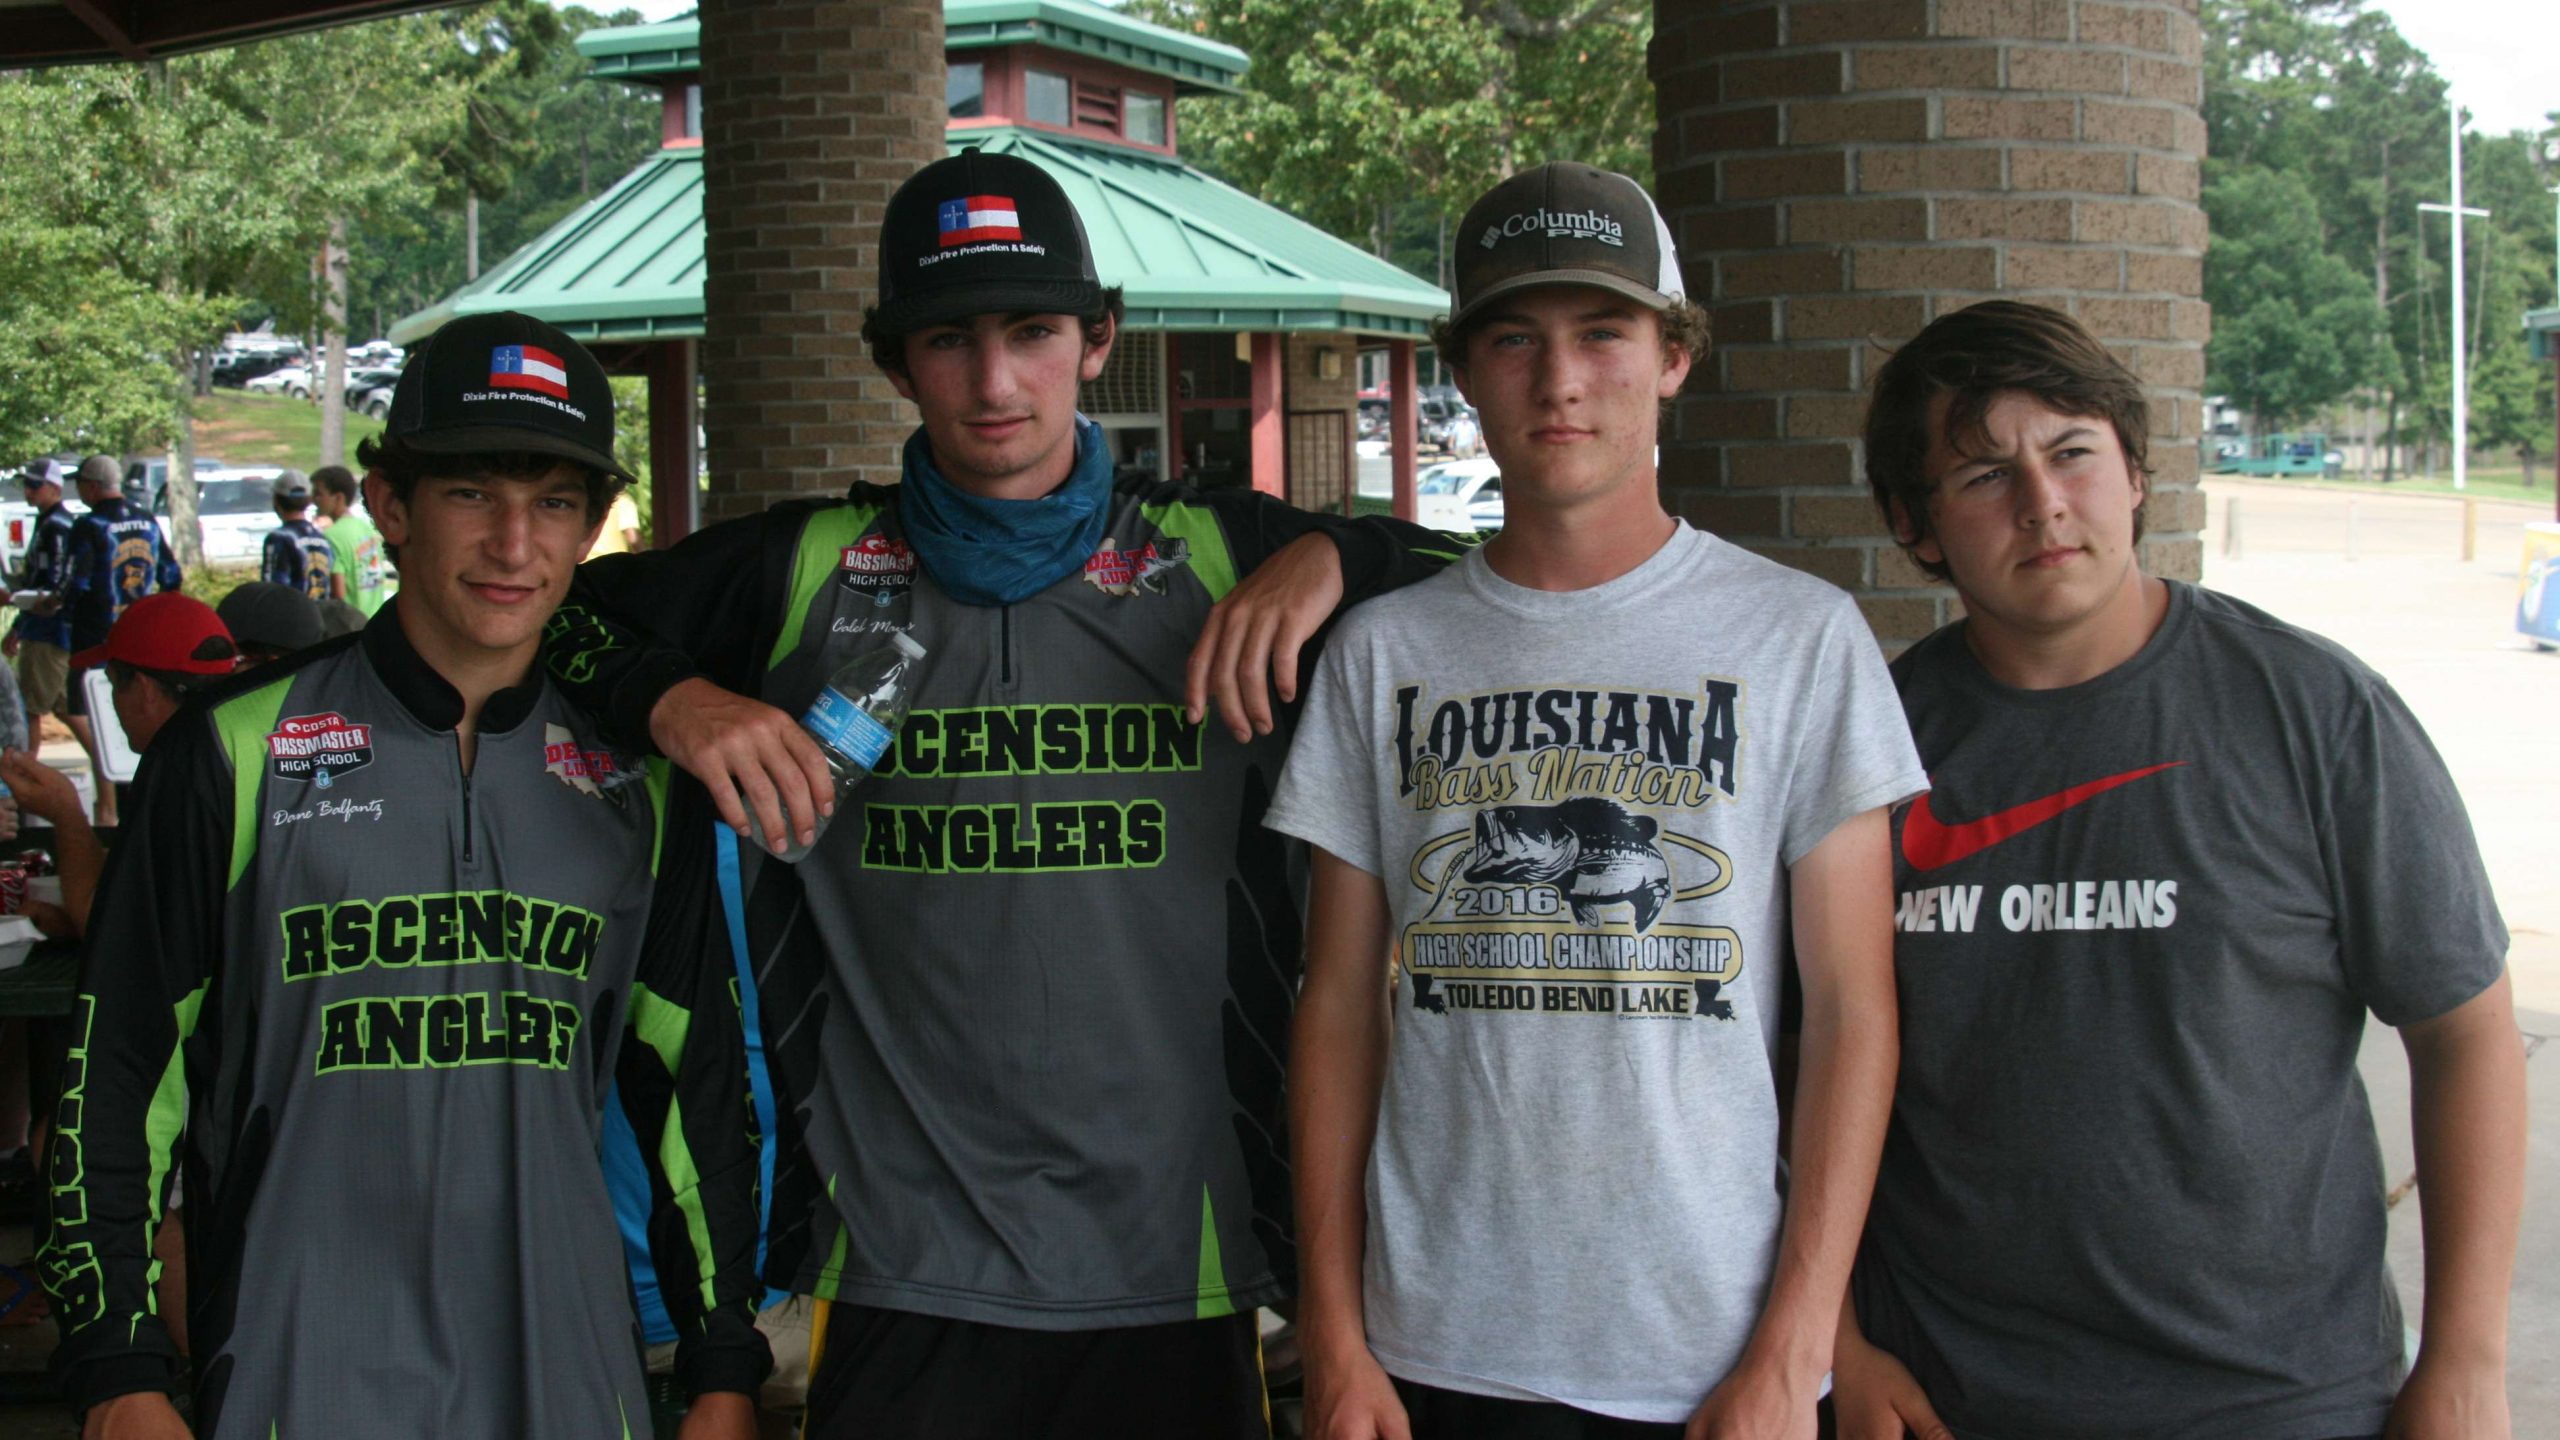 Ascenion Anglers, from left, Dane Balfantz, Caleb Myers, Ethan Smart, and Grant Bourque are ready for some fishing Monday morning.